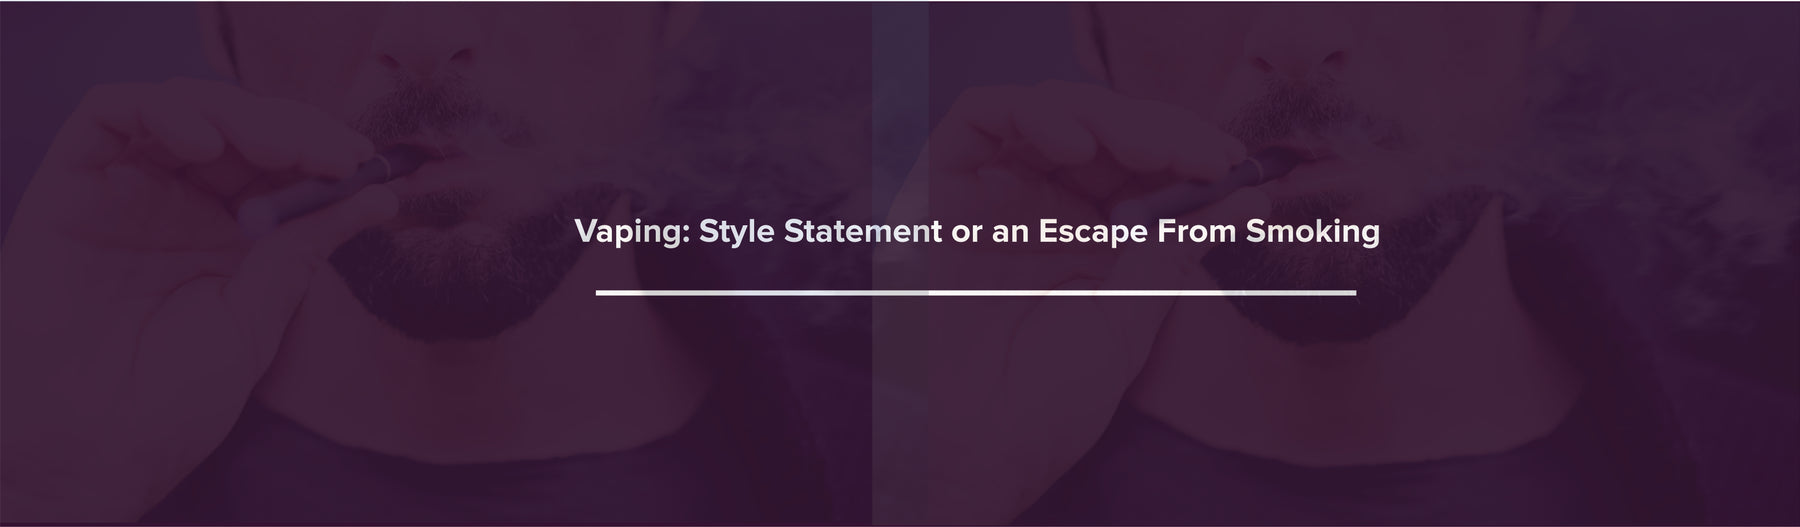 Vaping: A style statement or an Escape from Smoking